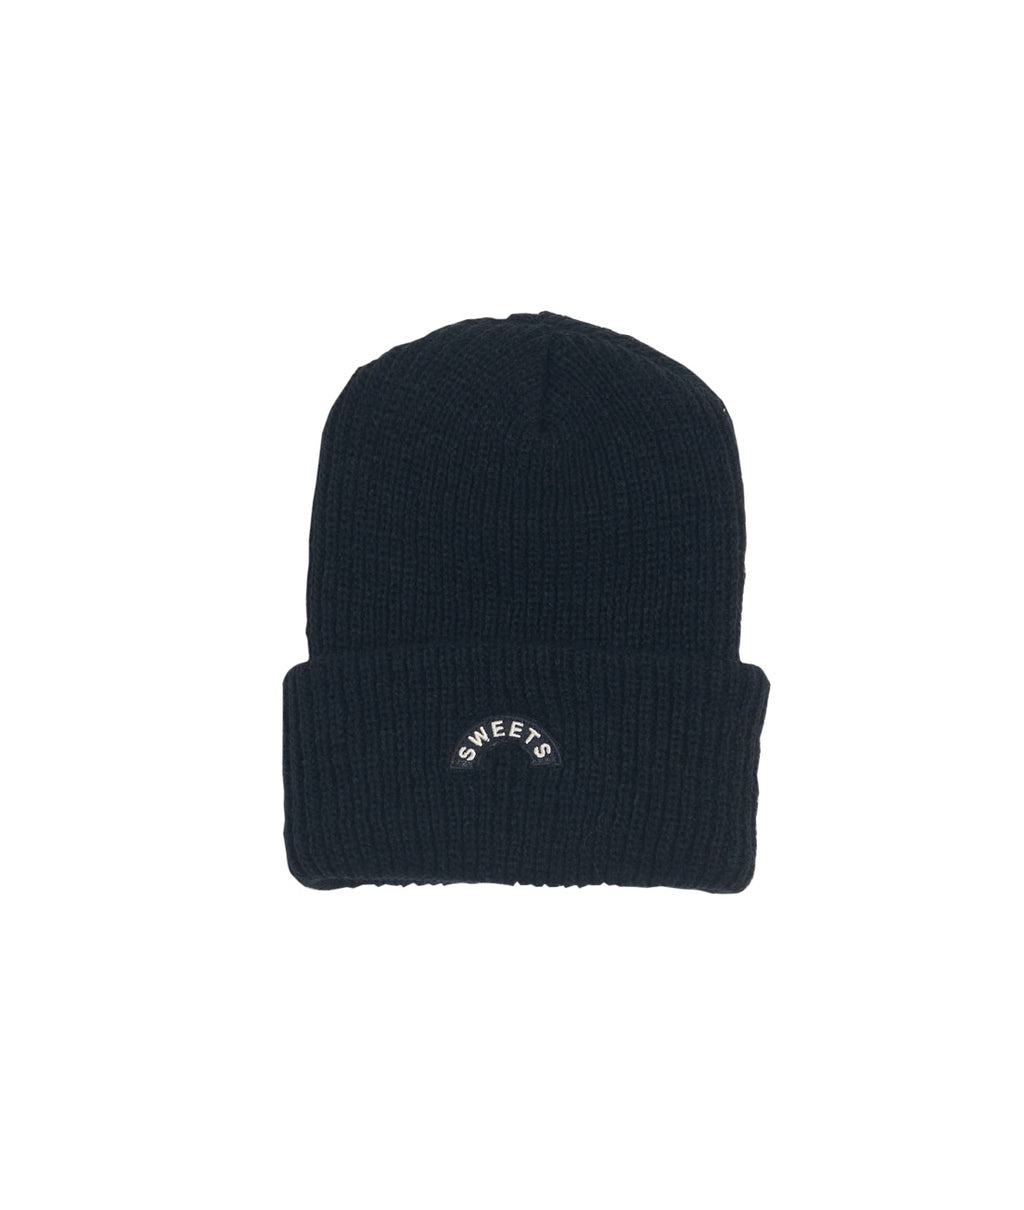 ALL SWEETS RESERVED BEANIE – ANGELES KNIT SWEETS RIGHTS 2021 BLACK - LOS